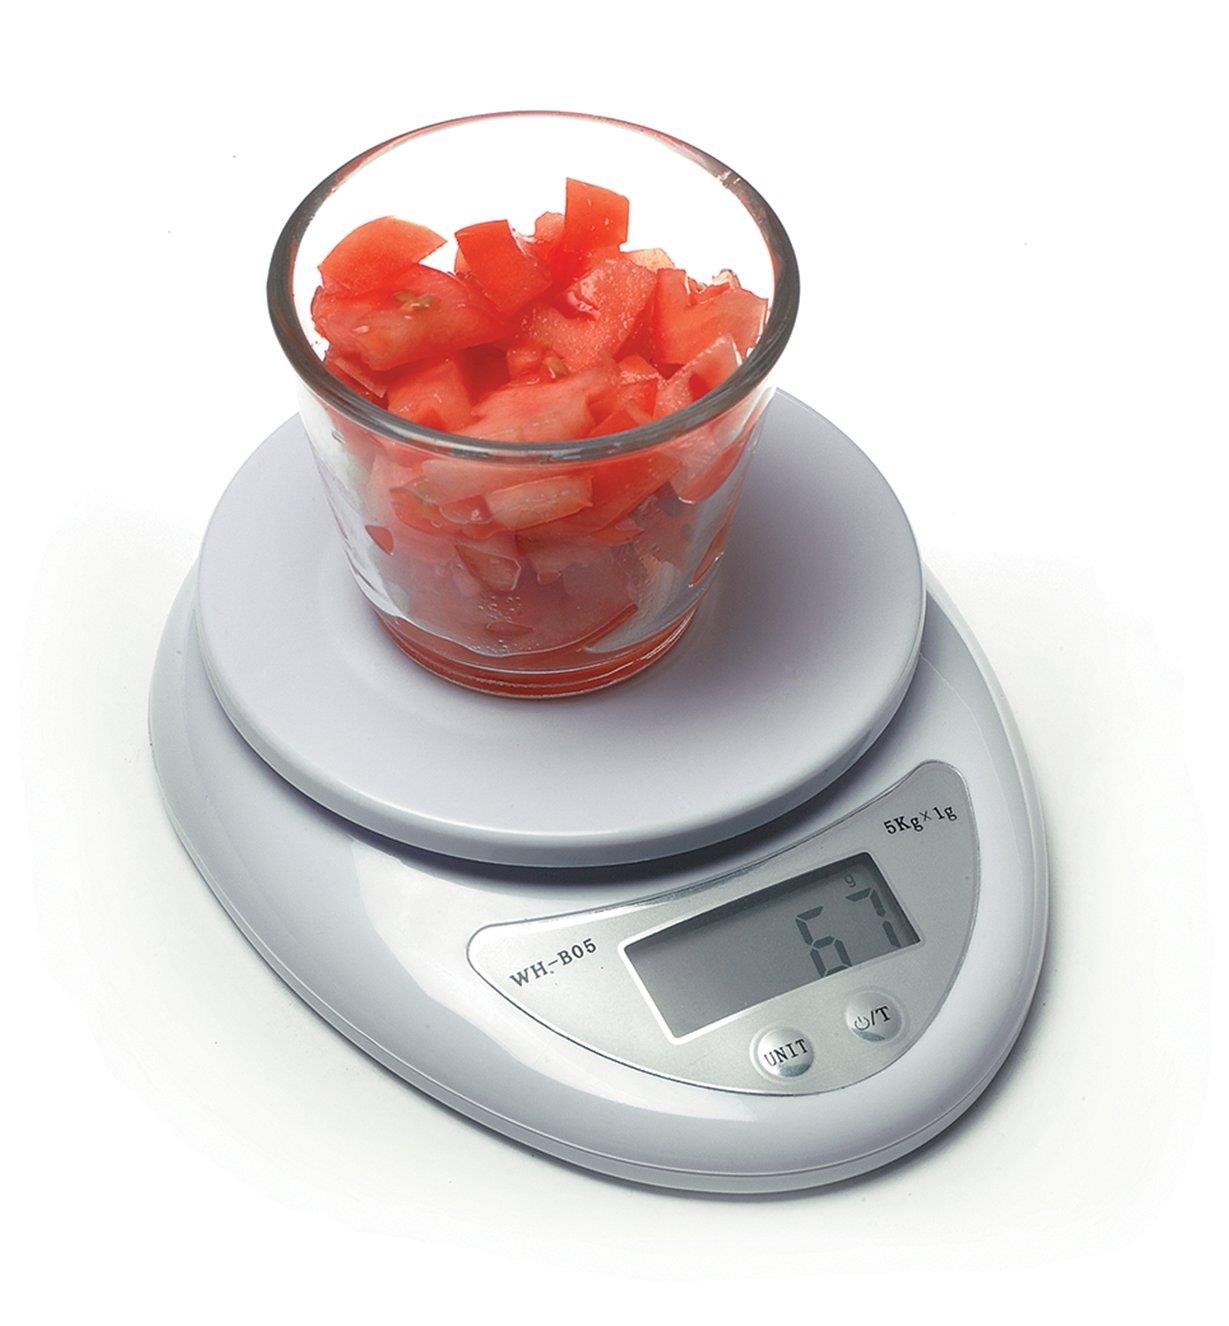 Mini Digital Kitchen Scale weighing a bowl of chopped tomatoes